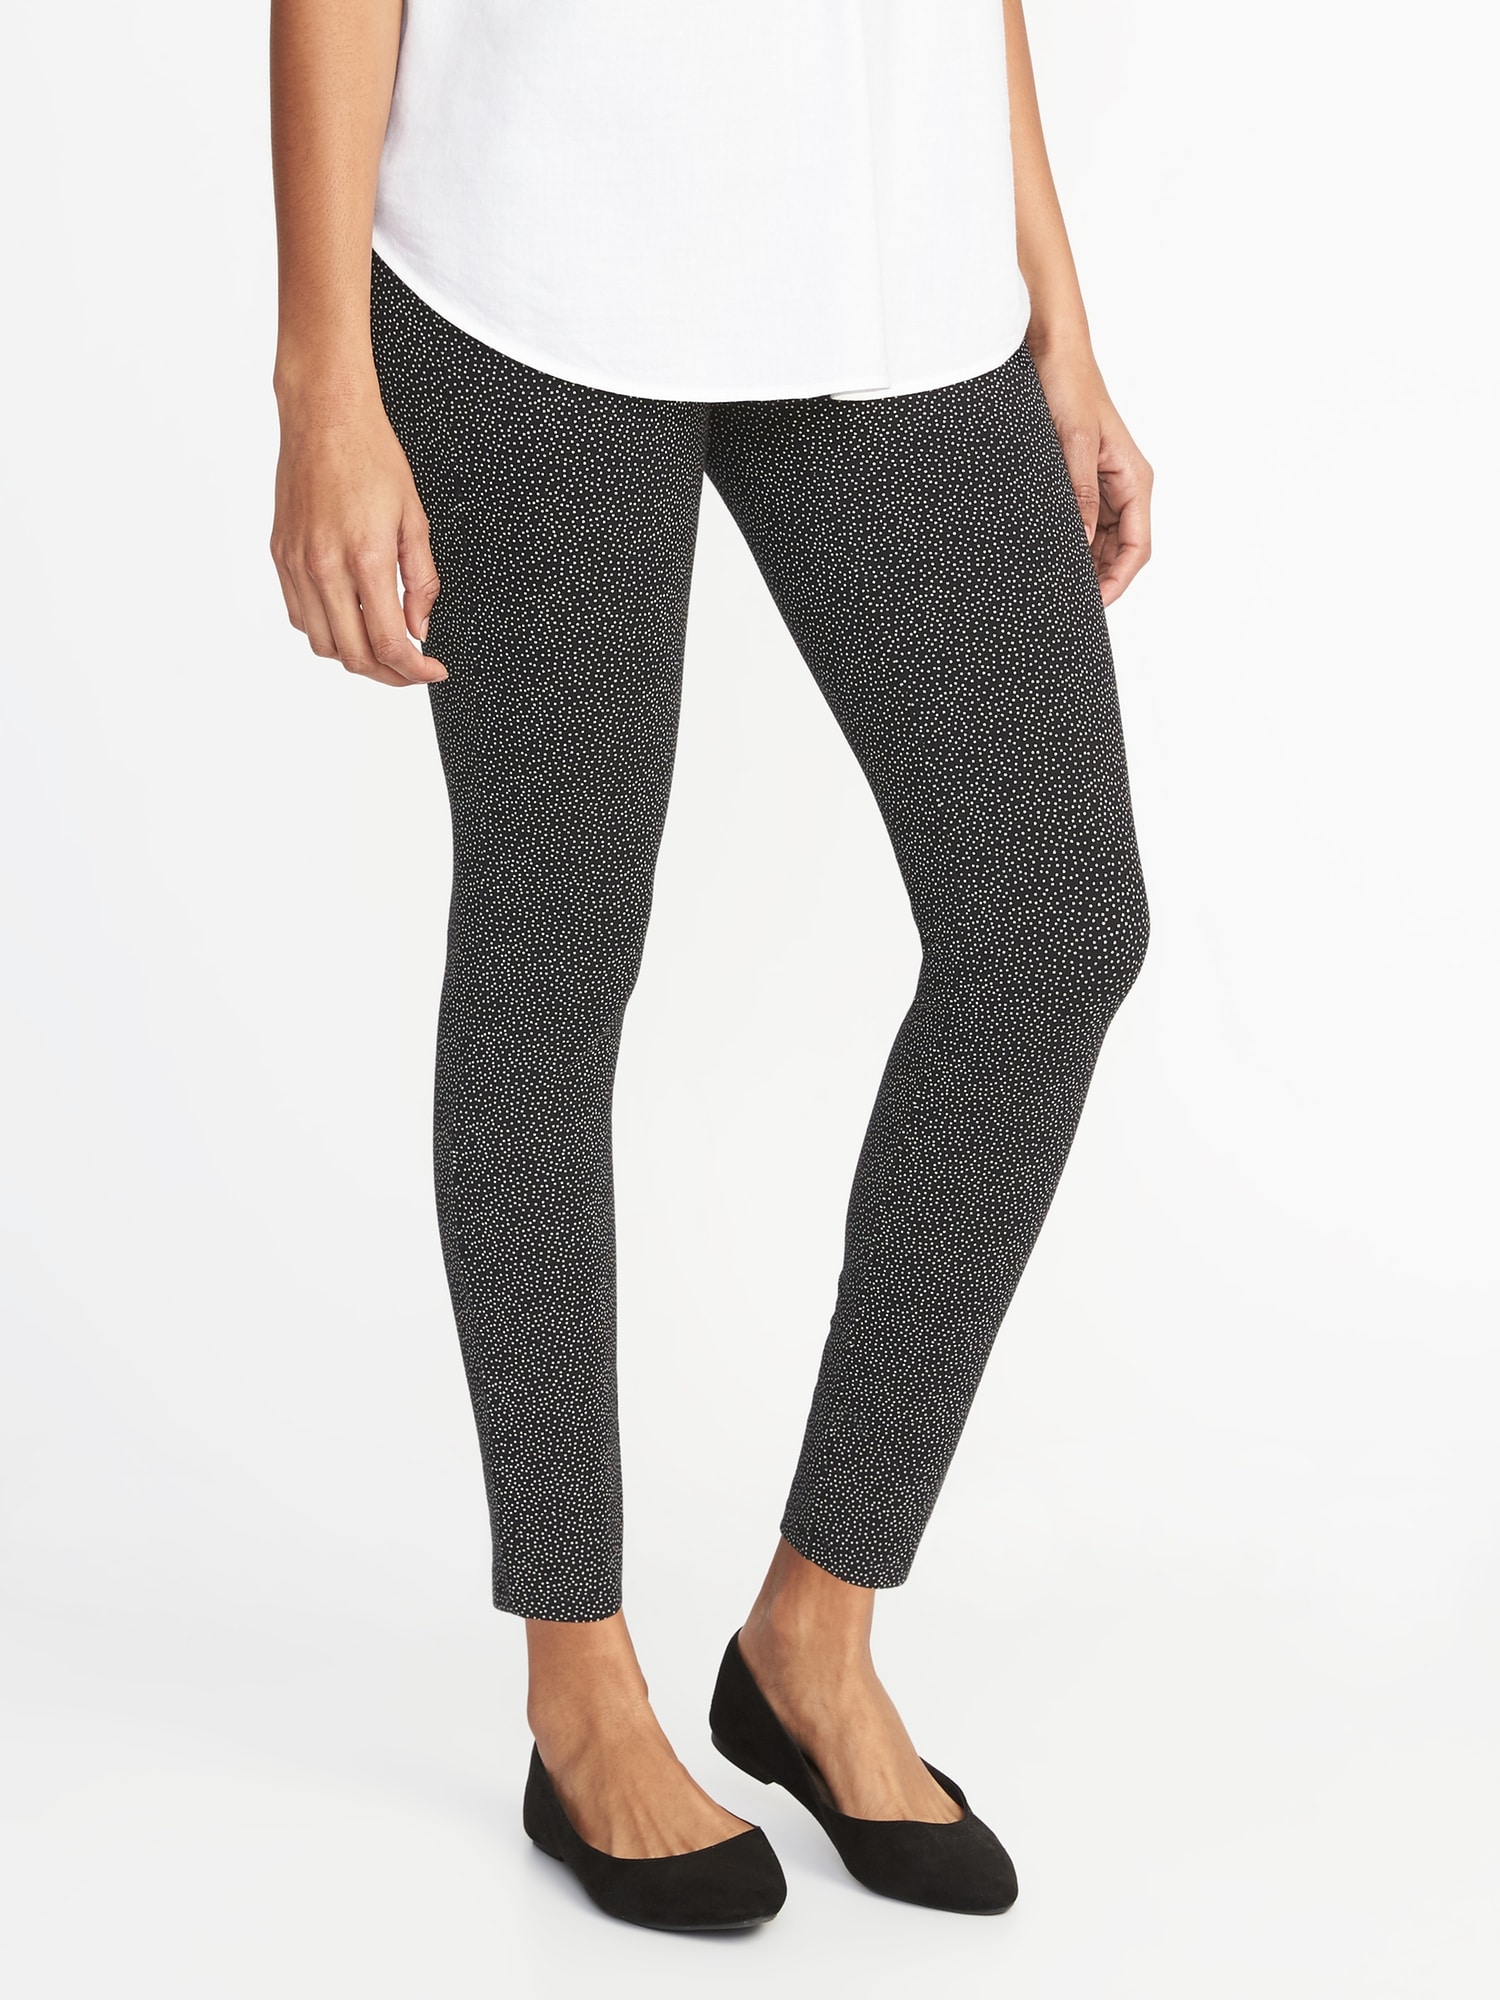 Old Navy Cotton Leggings Blue Size M - $16 (54% Off Retail) - From Sam